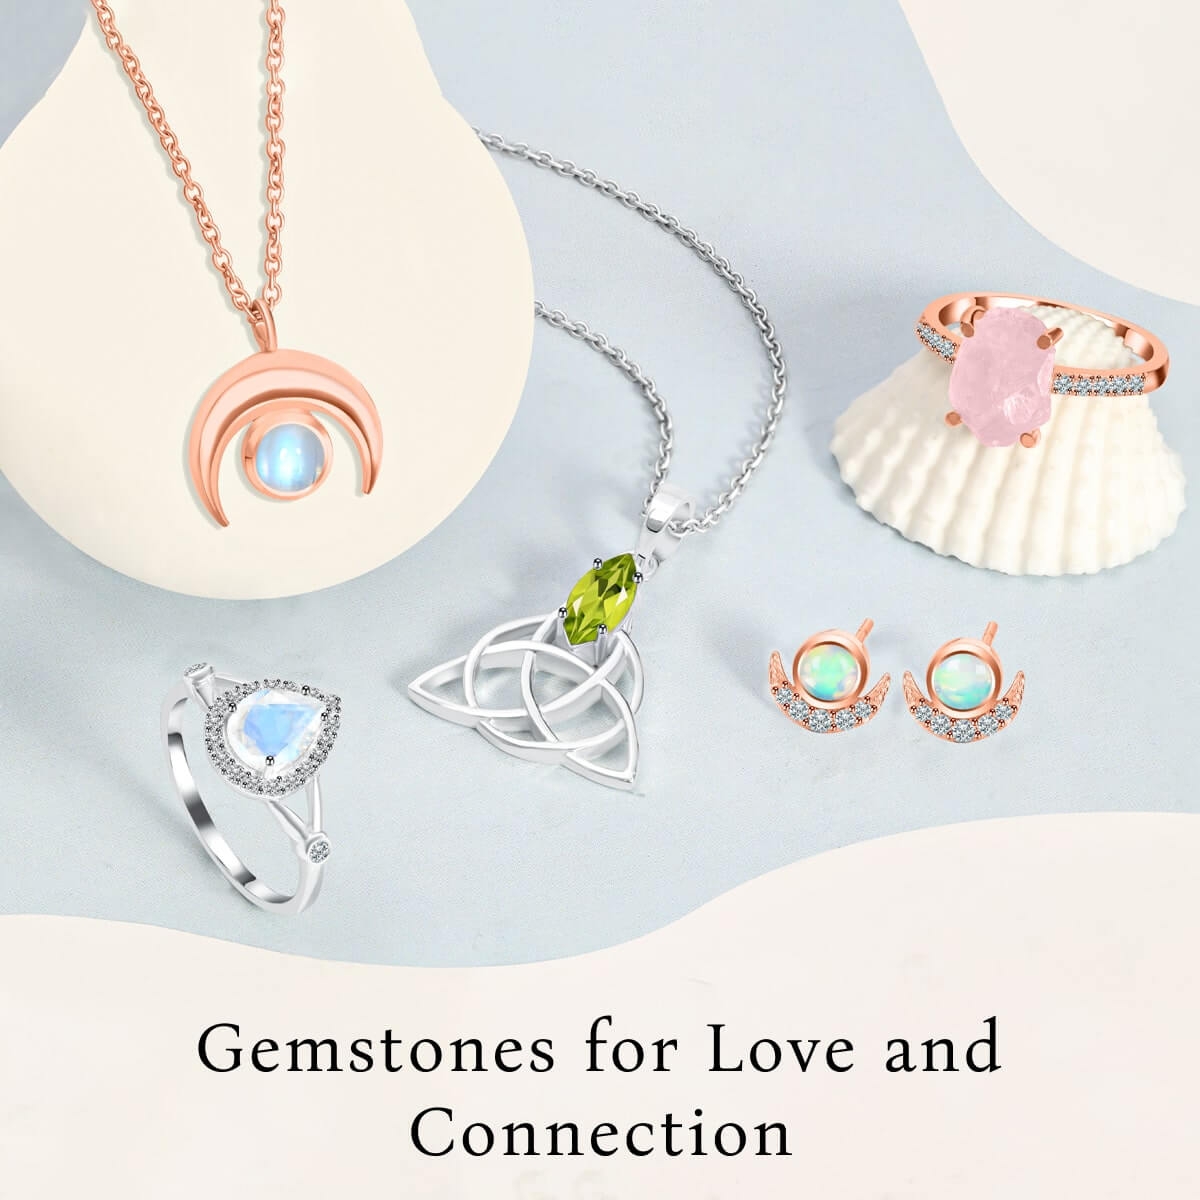 How To Use These Love Gemstones